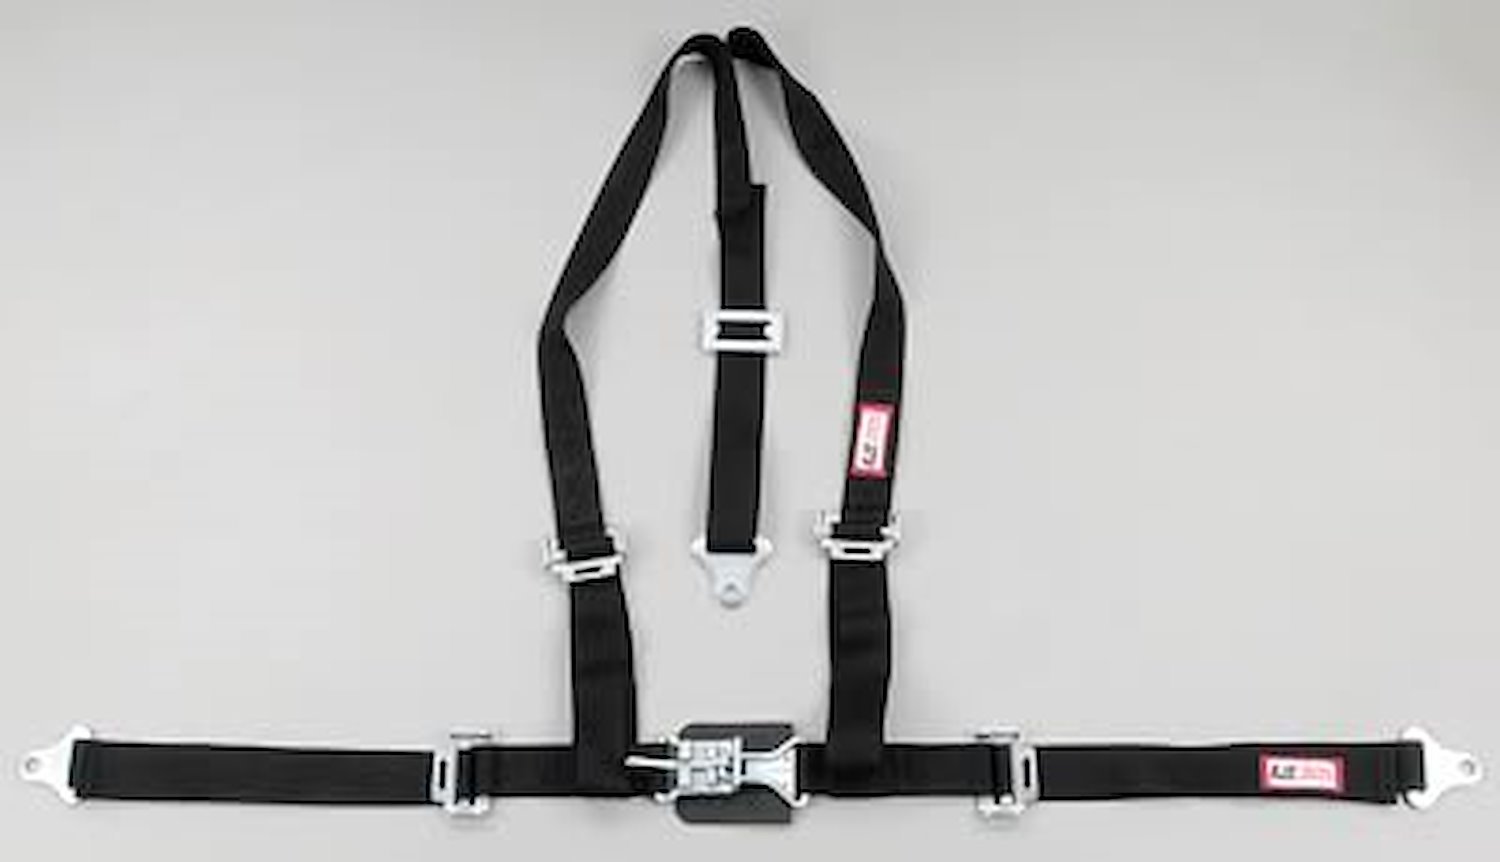 NON-SFI L&L HARNESS 3 PULL UP Lap BELT SEWN IN 2 S.H. Y FLOOR Mount w/STERNUM STRAP ALL WRAP ENDS BLACK